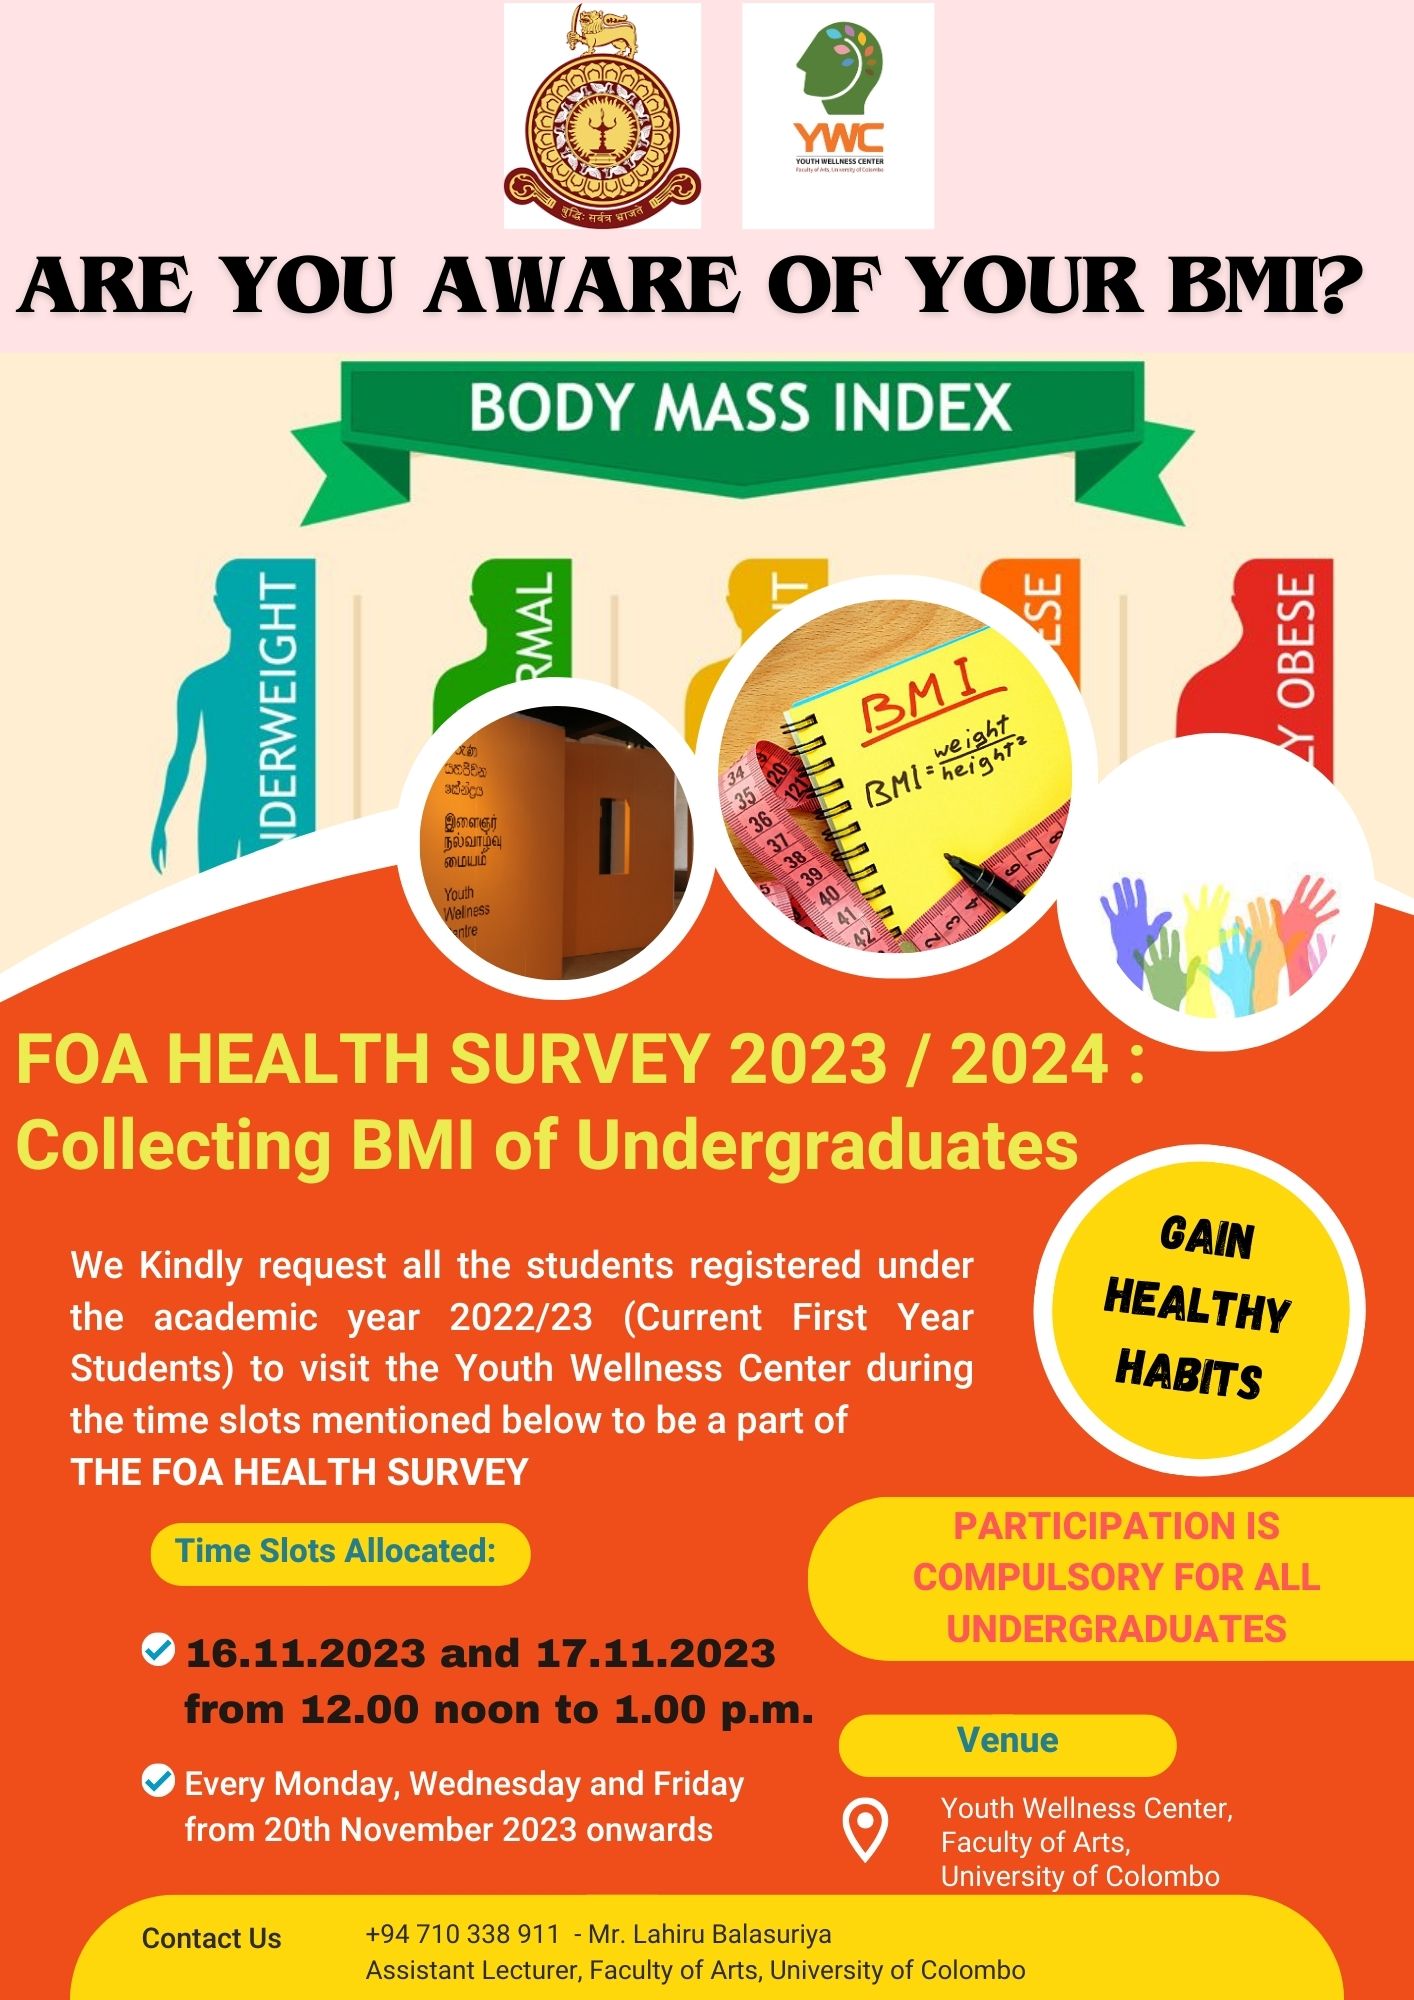 Heath Survey 2023/2024 Faculty of Arts, University of Colombo.  Pls join to calculate your Body Mass Index (BMI) from 16th November onward Find the information in the flyer.